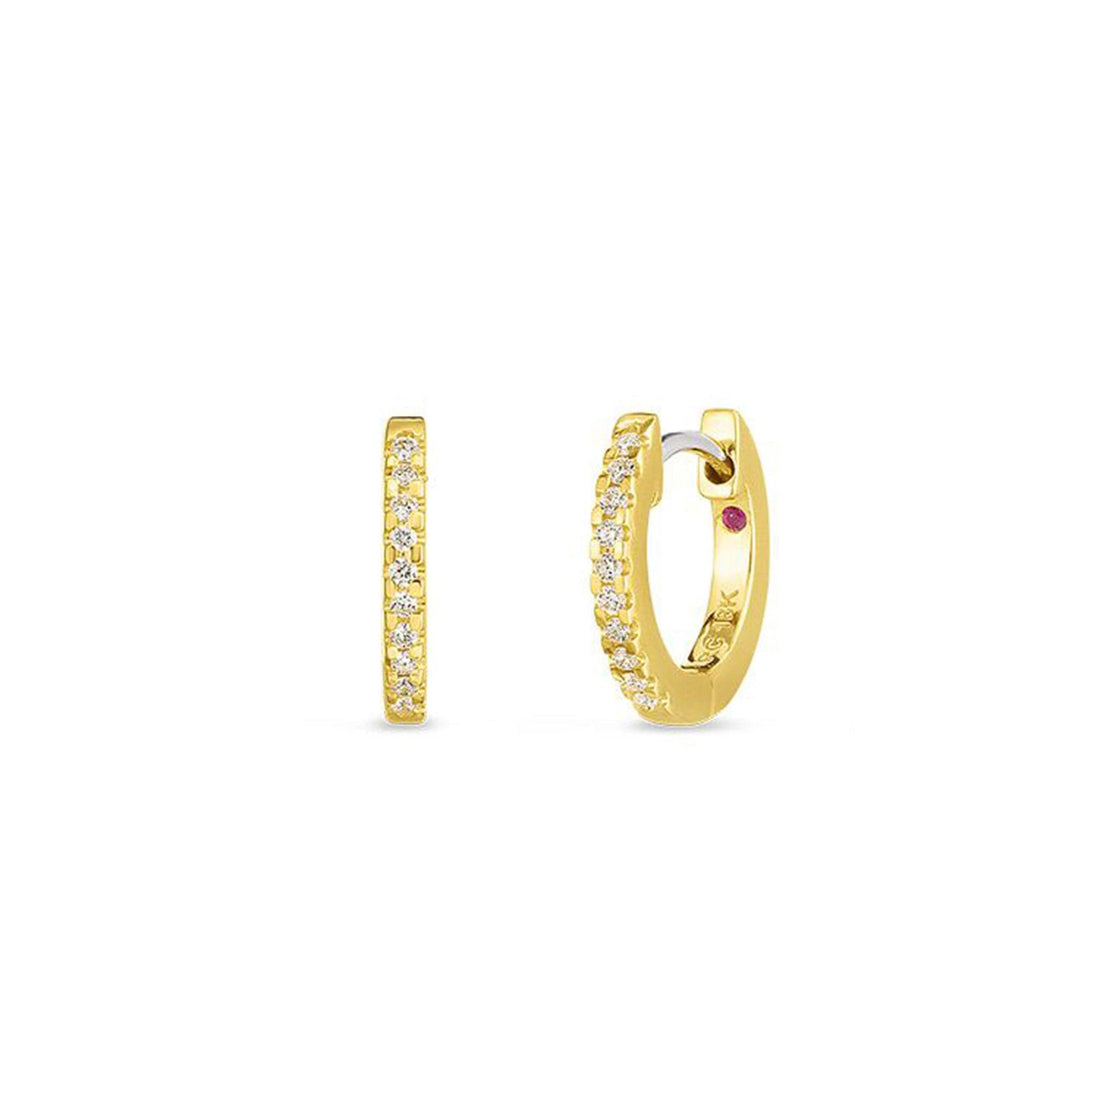 Roberto Coin Huggy Earrings with Micropave Diamonds Yellow Gold